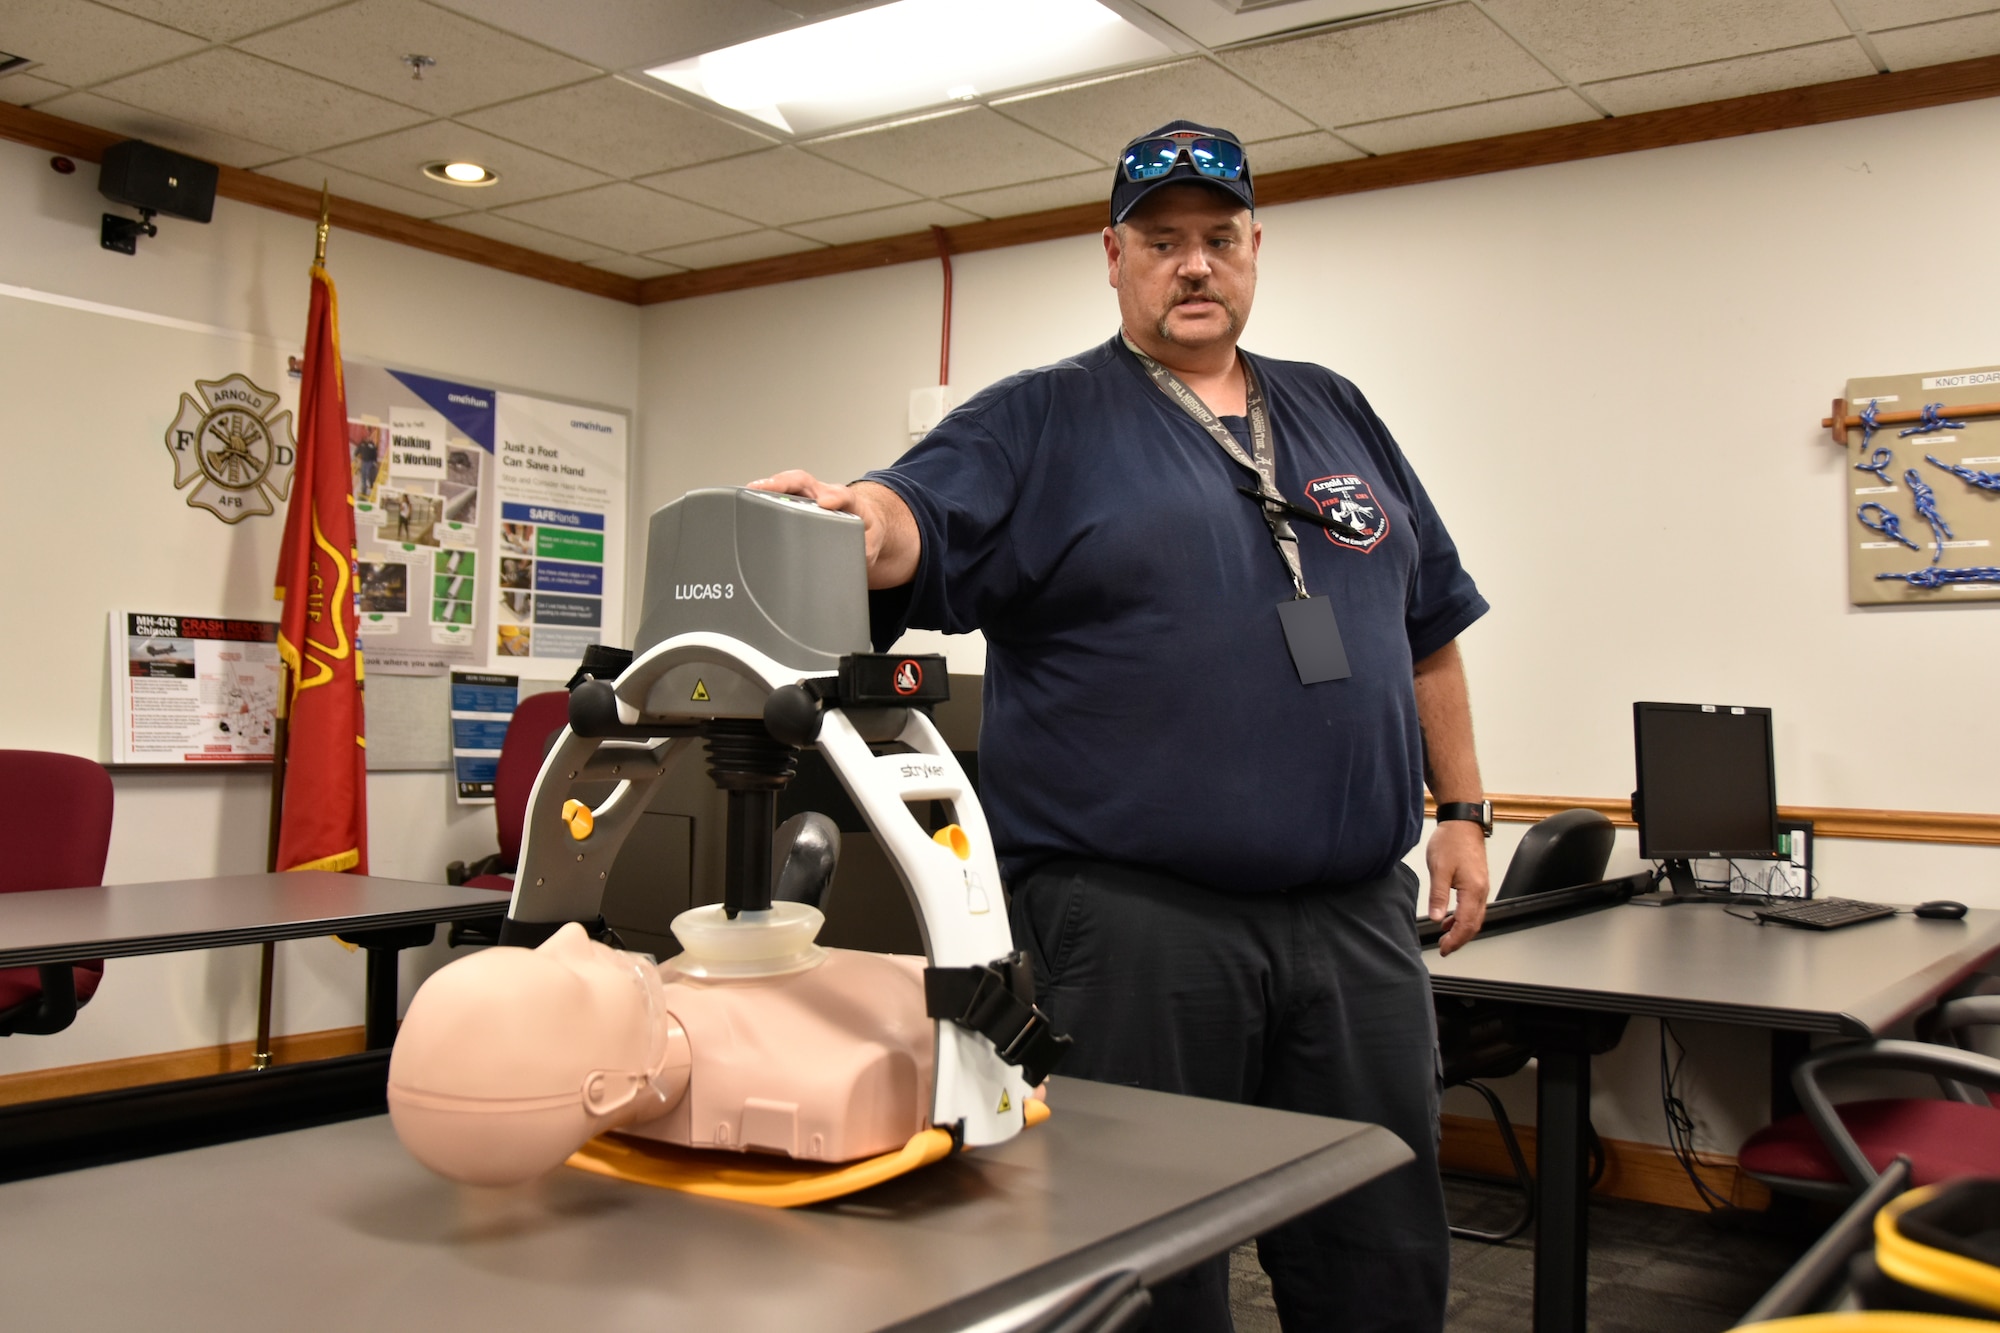 Stephen McCluskey, a firefighter and paramedic with Arnold Air Force Base Fire and Emergency Services at Arnold AFB, Tenn., demonstrates the LUCAS 3 Chest Compression System July 17, 2023. Arnold FES was able to acquire two of the automated CPR devices through Arnold Engineering Development Complex Spark Tank funding the department received earlier this year. Arnold AFB is the headquarters of AEDC. The LUCAS 3 is designed to deliver uninterrupted chest compressions at a consistent rate and depth, whether in the field, during transport and throughout arrival to the hospital. (U.S. Air Force photo by Bradley Hicks) (This image has been altered by obscuring a badge for security purposes.)